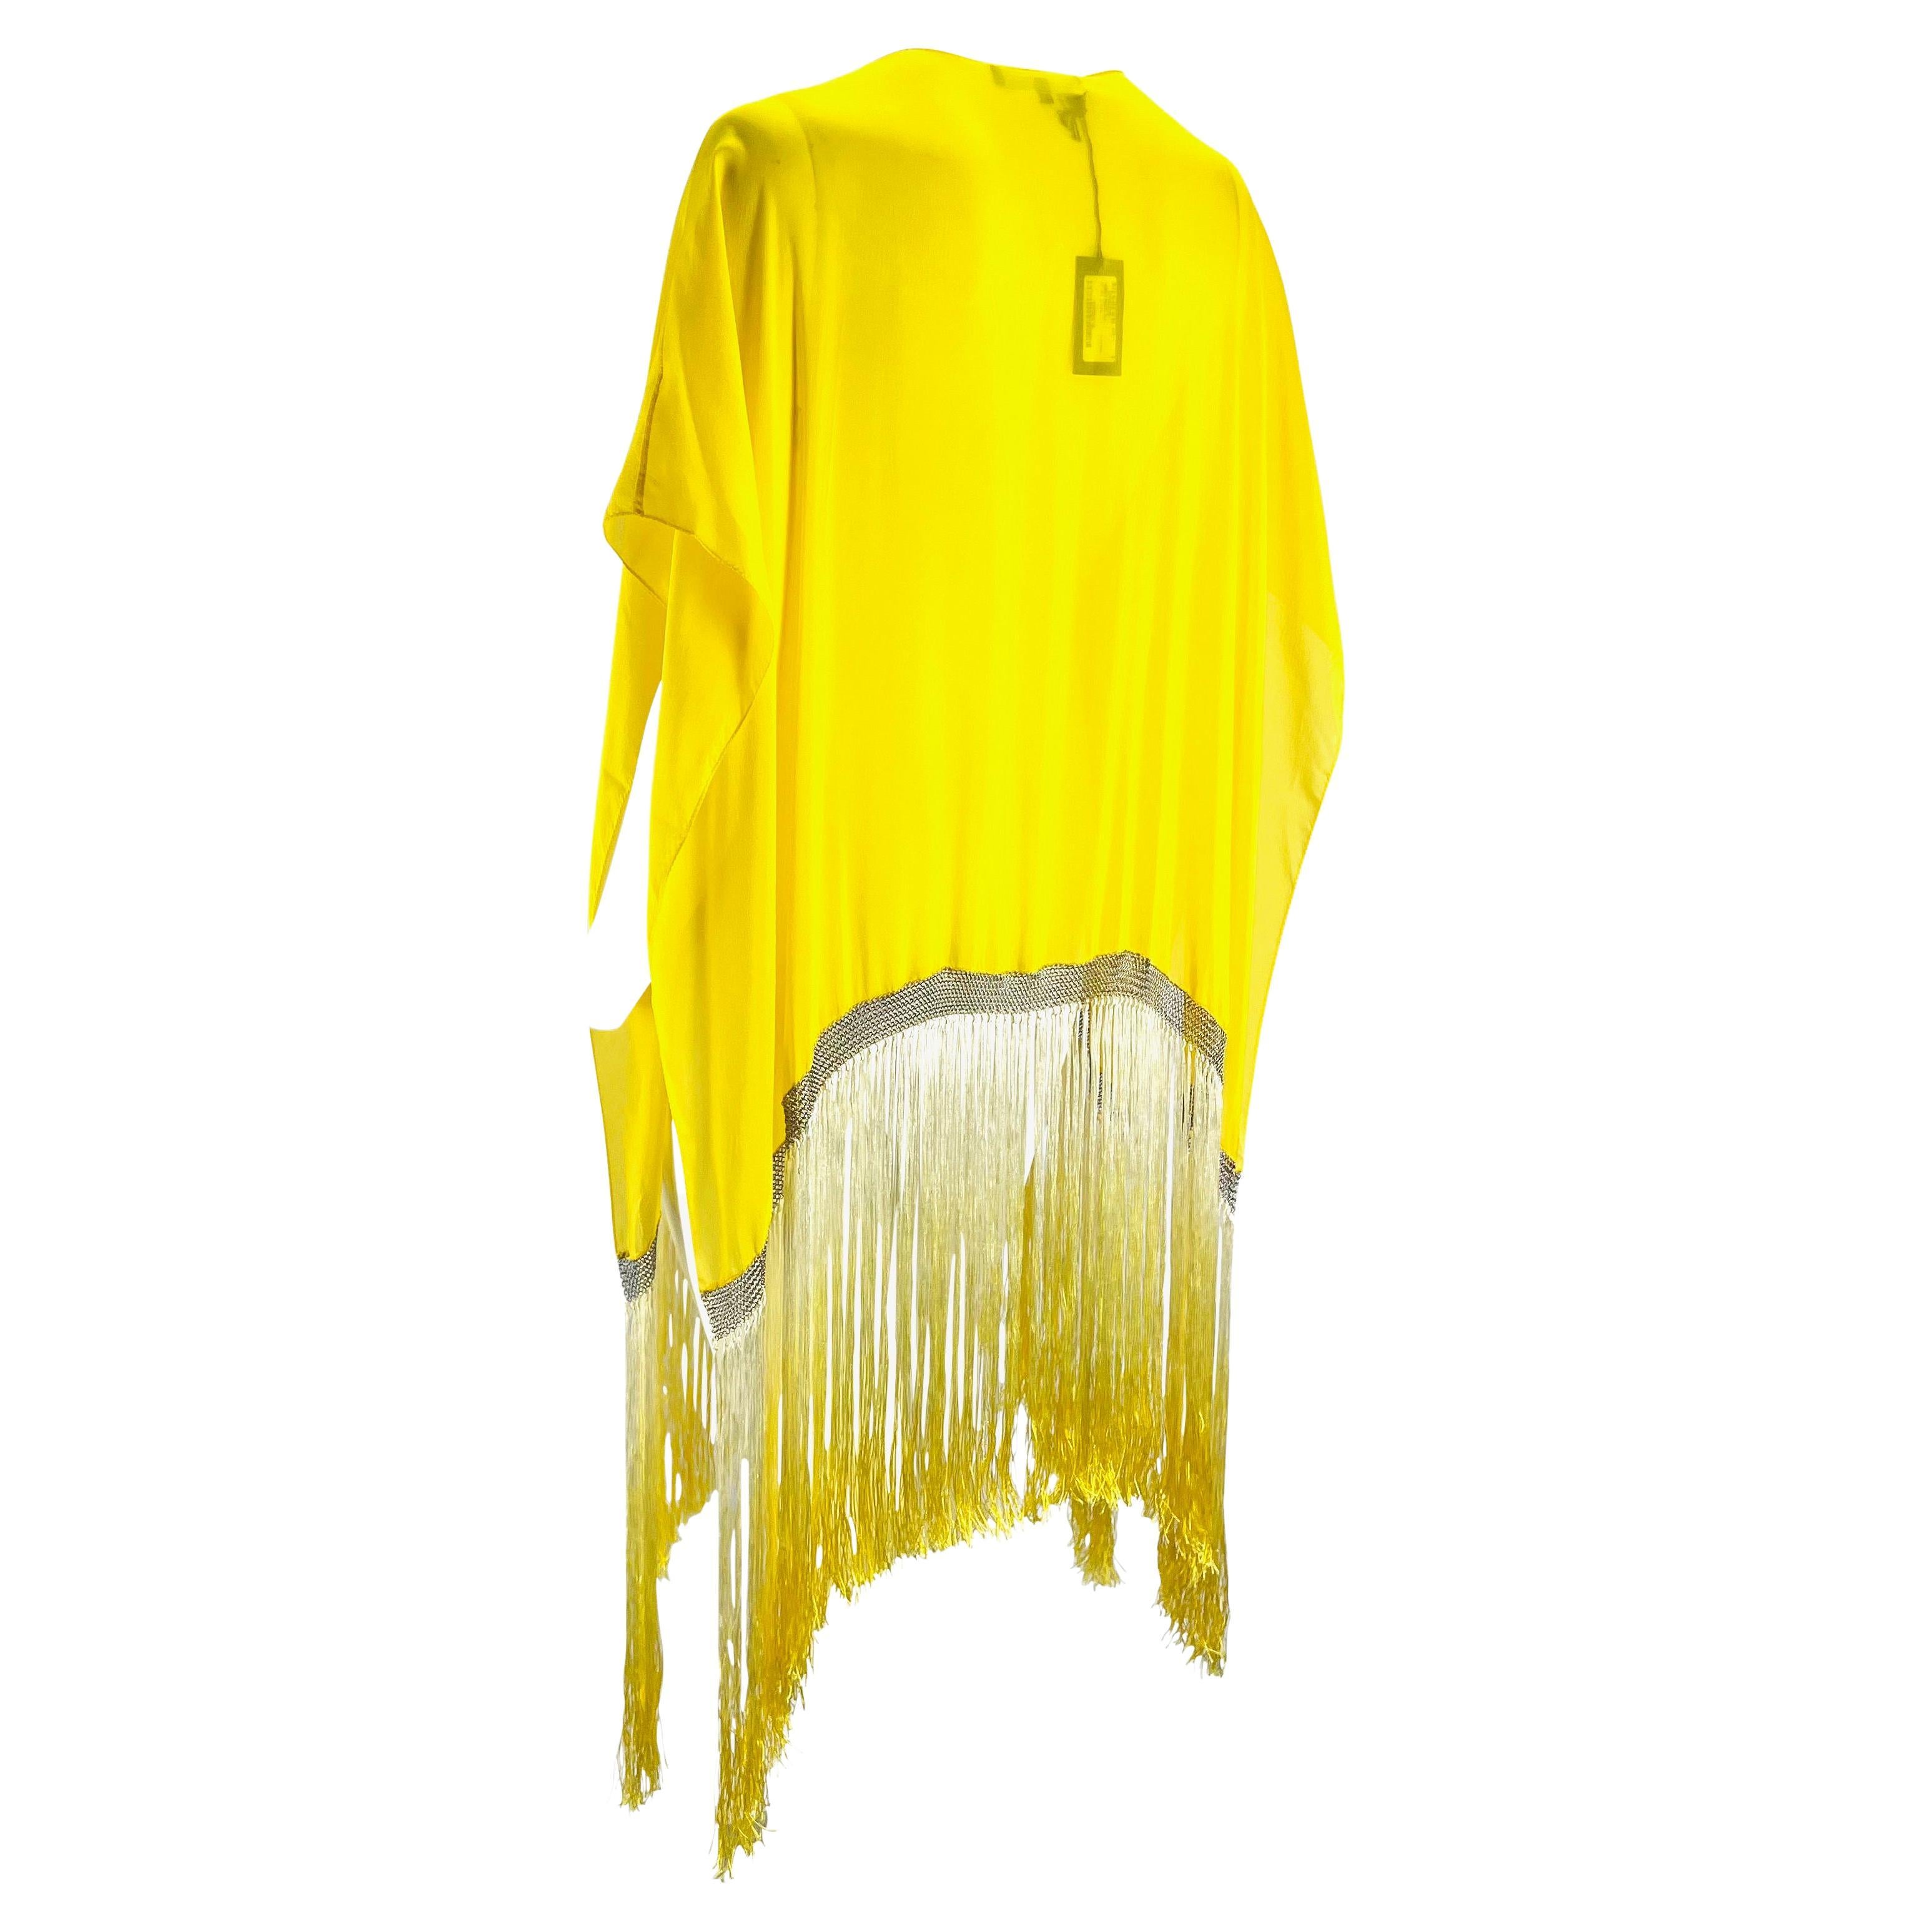 S/S 2004 Gucci by Tom Ford Chain Link Yellow Ombré Fringe Kaftan Cover Up NWT For Sale 2